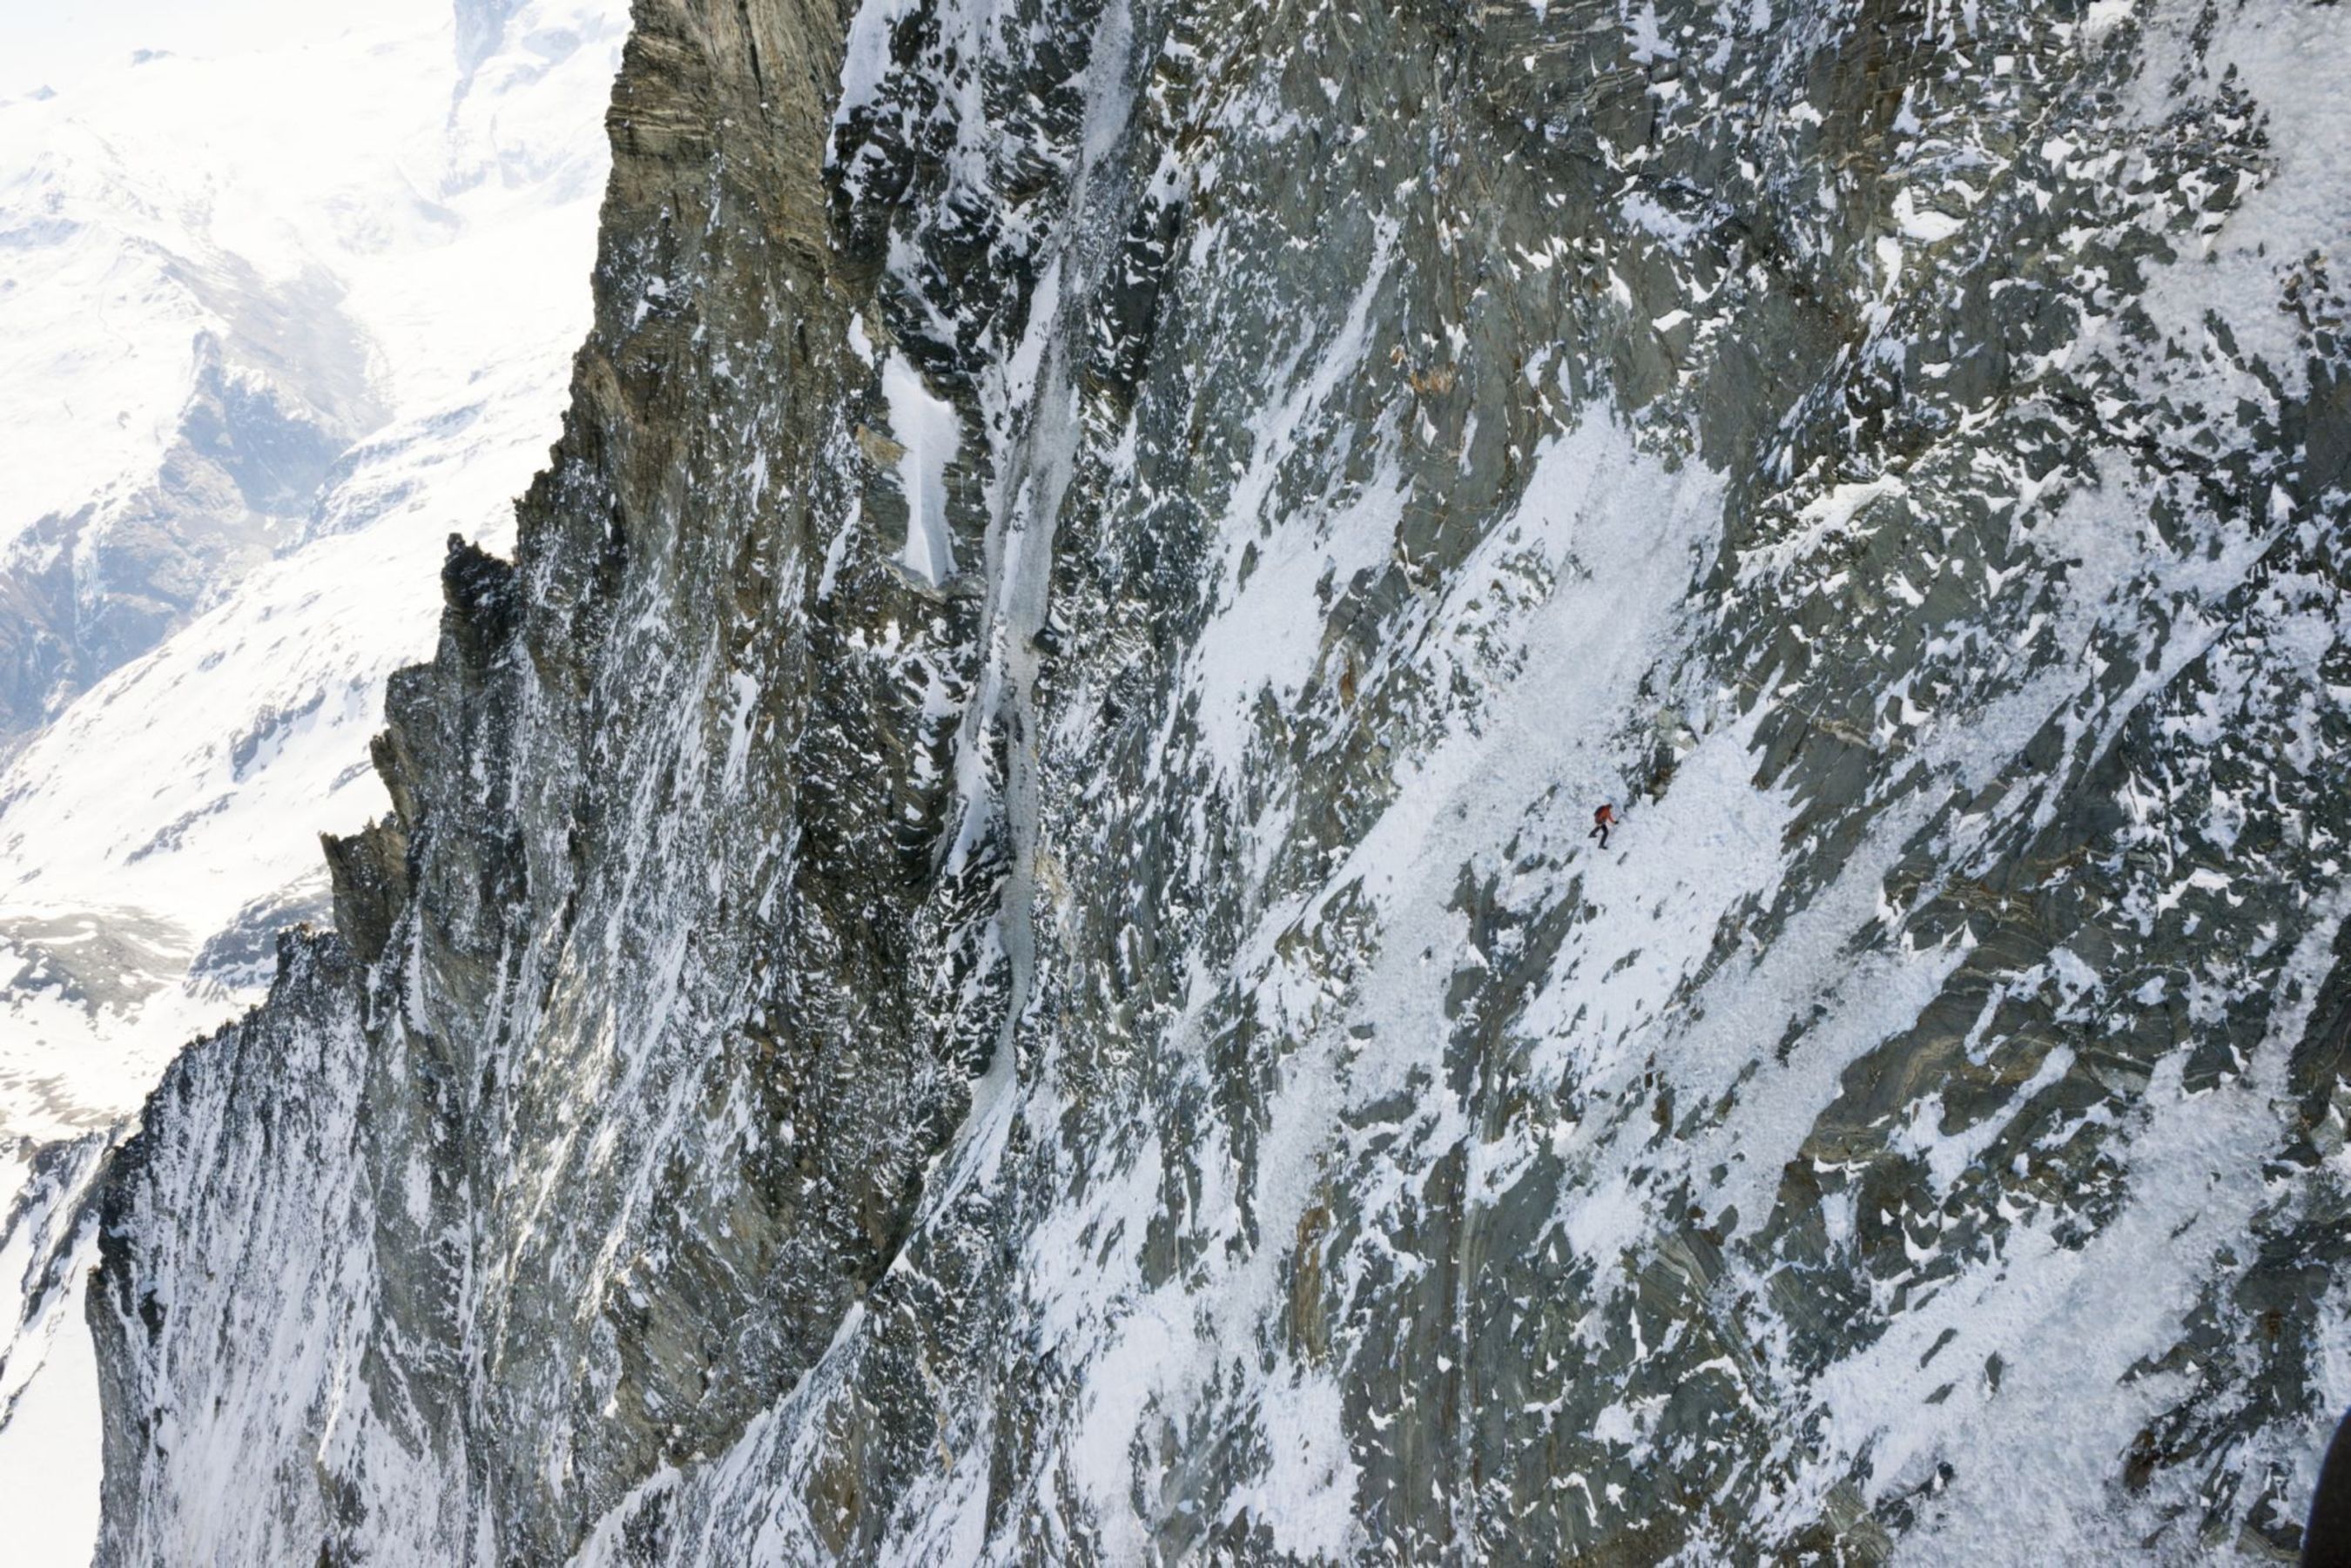 Mammut Pro Team Athlete Dani Arnold on record course in the 1100 meter high North Face of the Matterhorn. Photo credit: Visual Impact/Christian Gisi (PRNewsFoto/Mammut Sports Group AG)